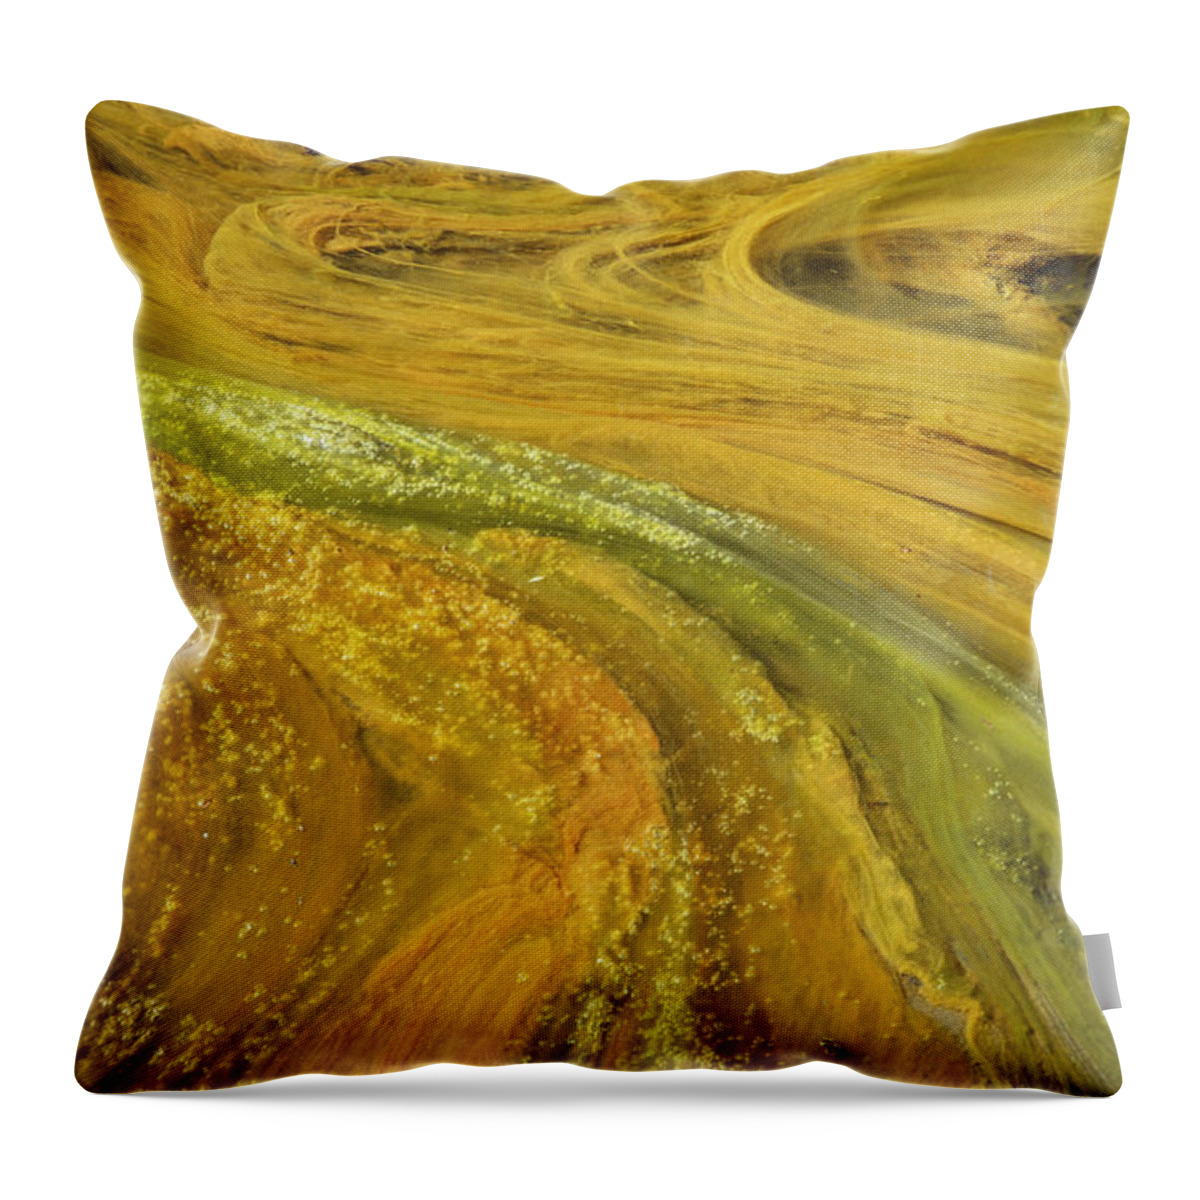 Algae Throw Pillow featuring the photograph Algae In A Pond by Thomas And Pat Leeson